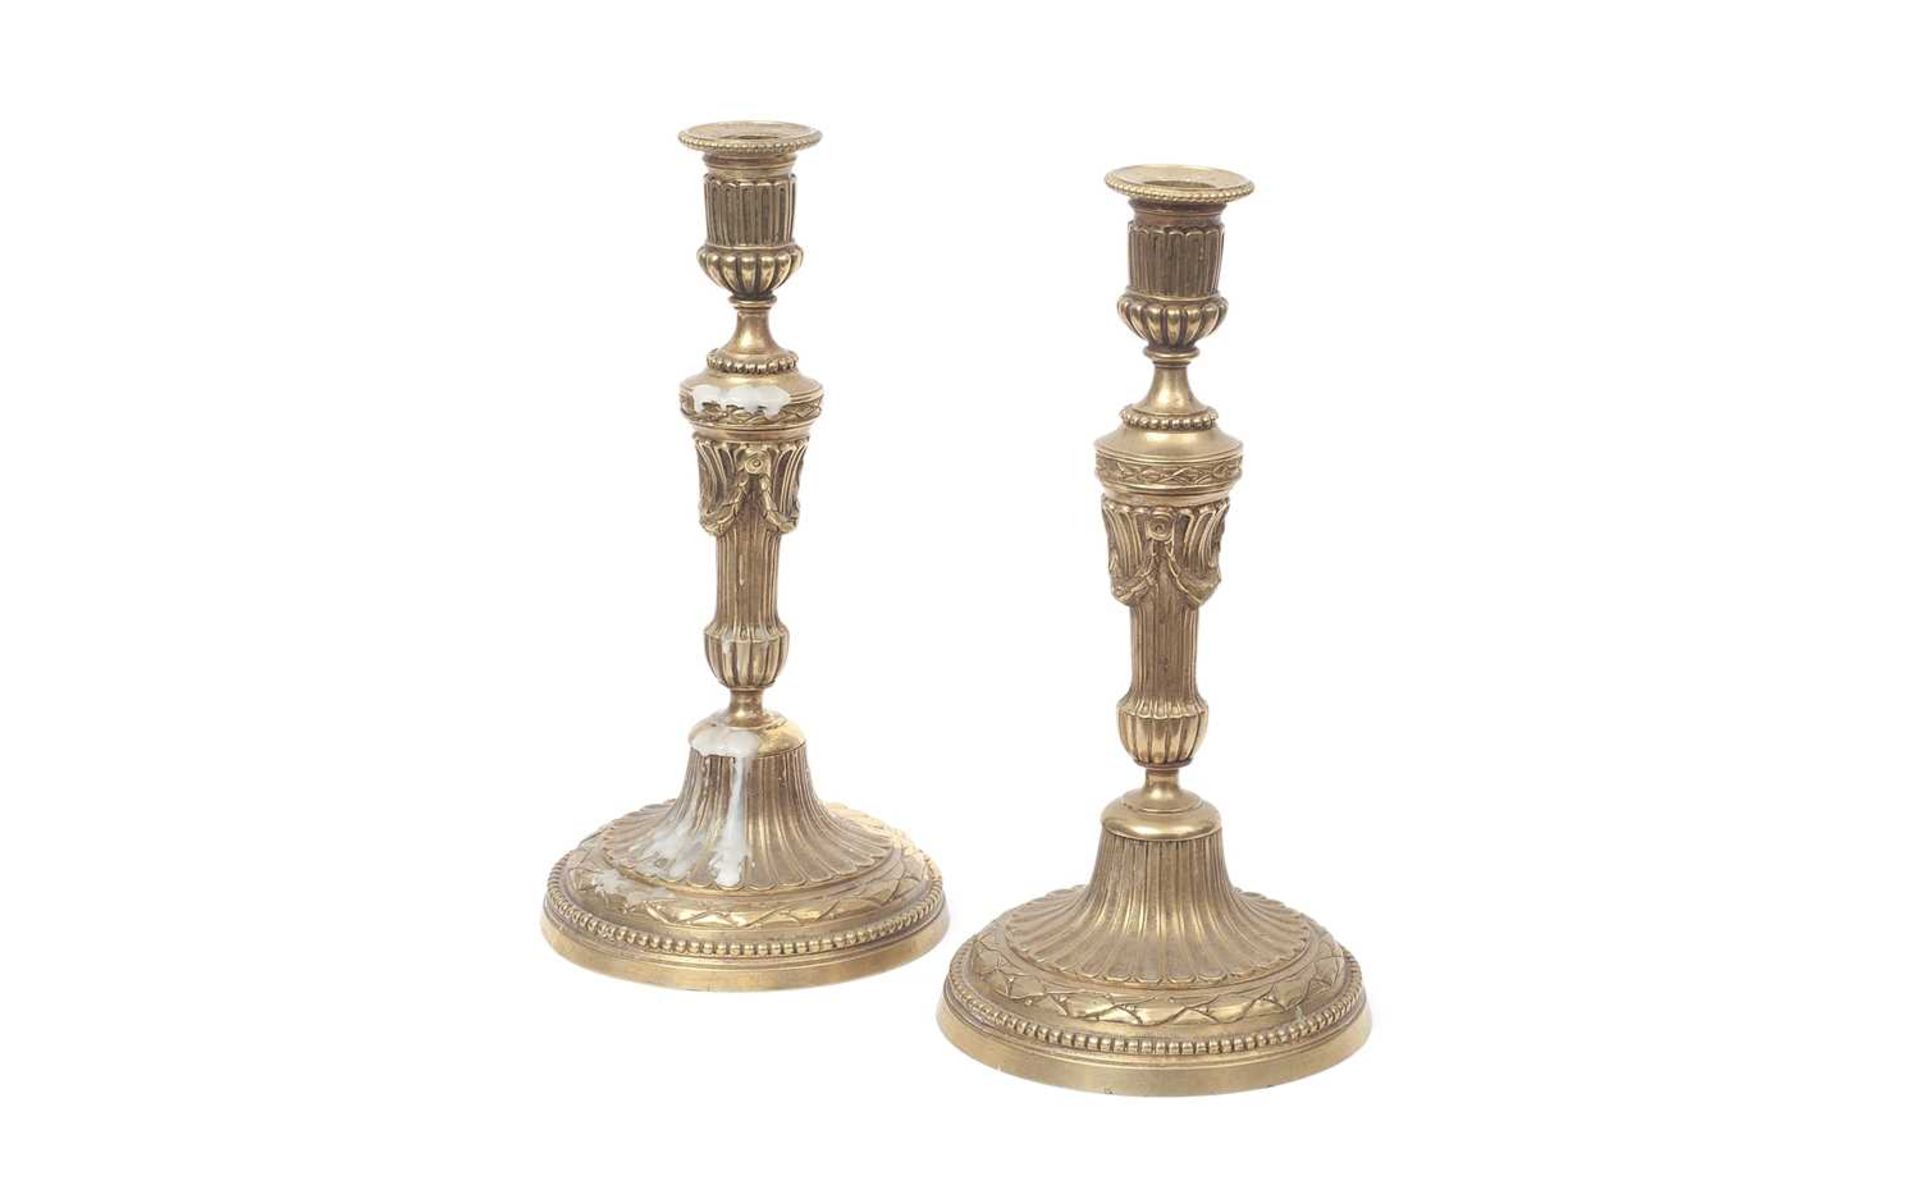 A PAIR OF 19TH CENTURY FRENCH GILT BRONZE CANDLESTICKS